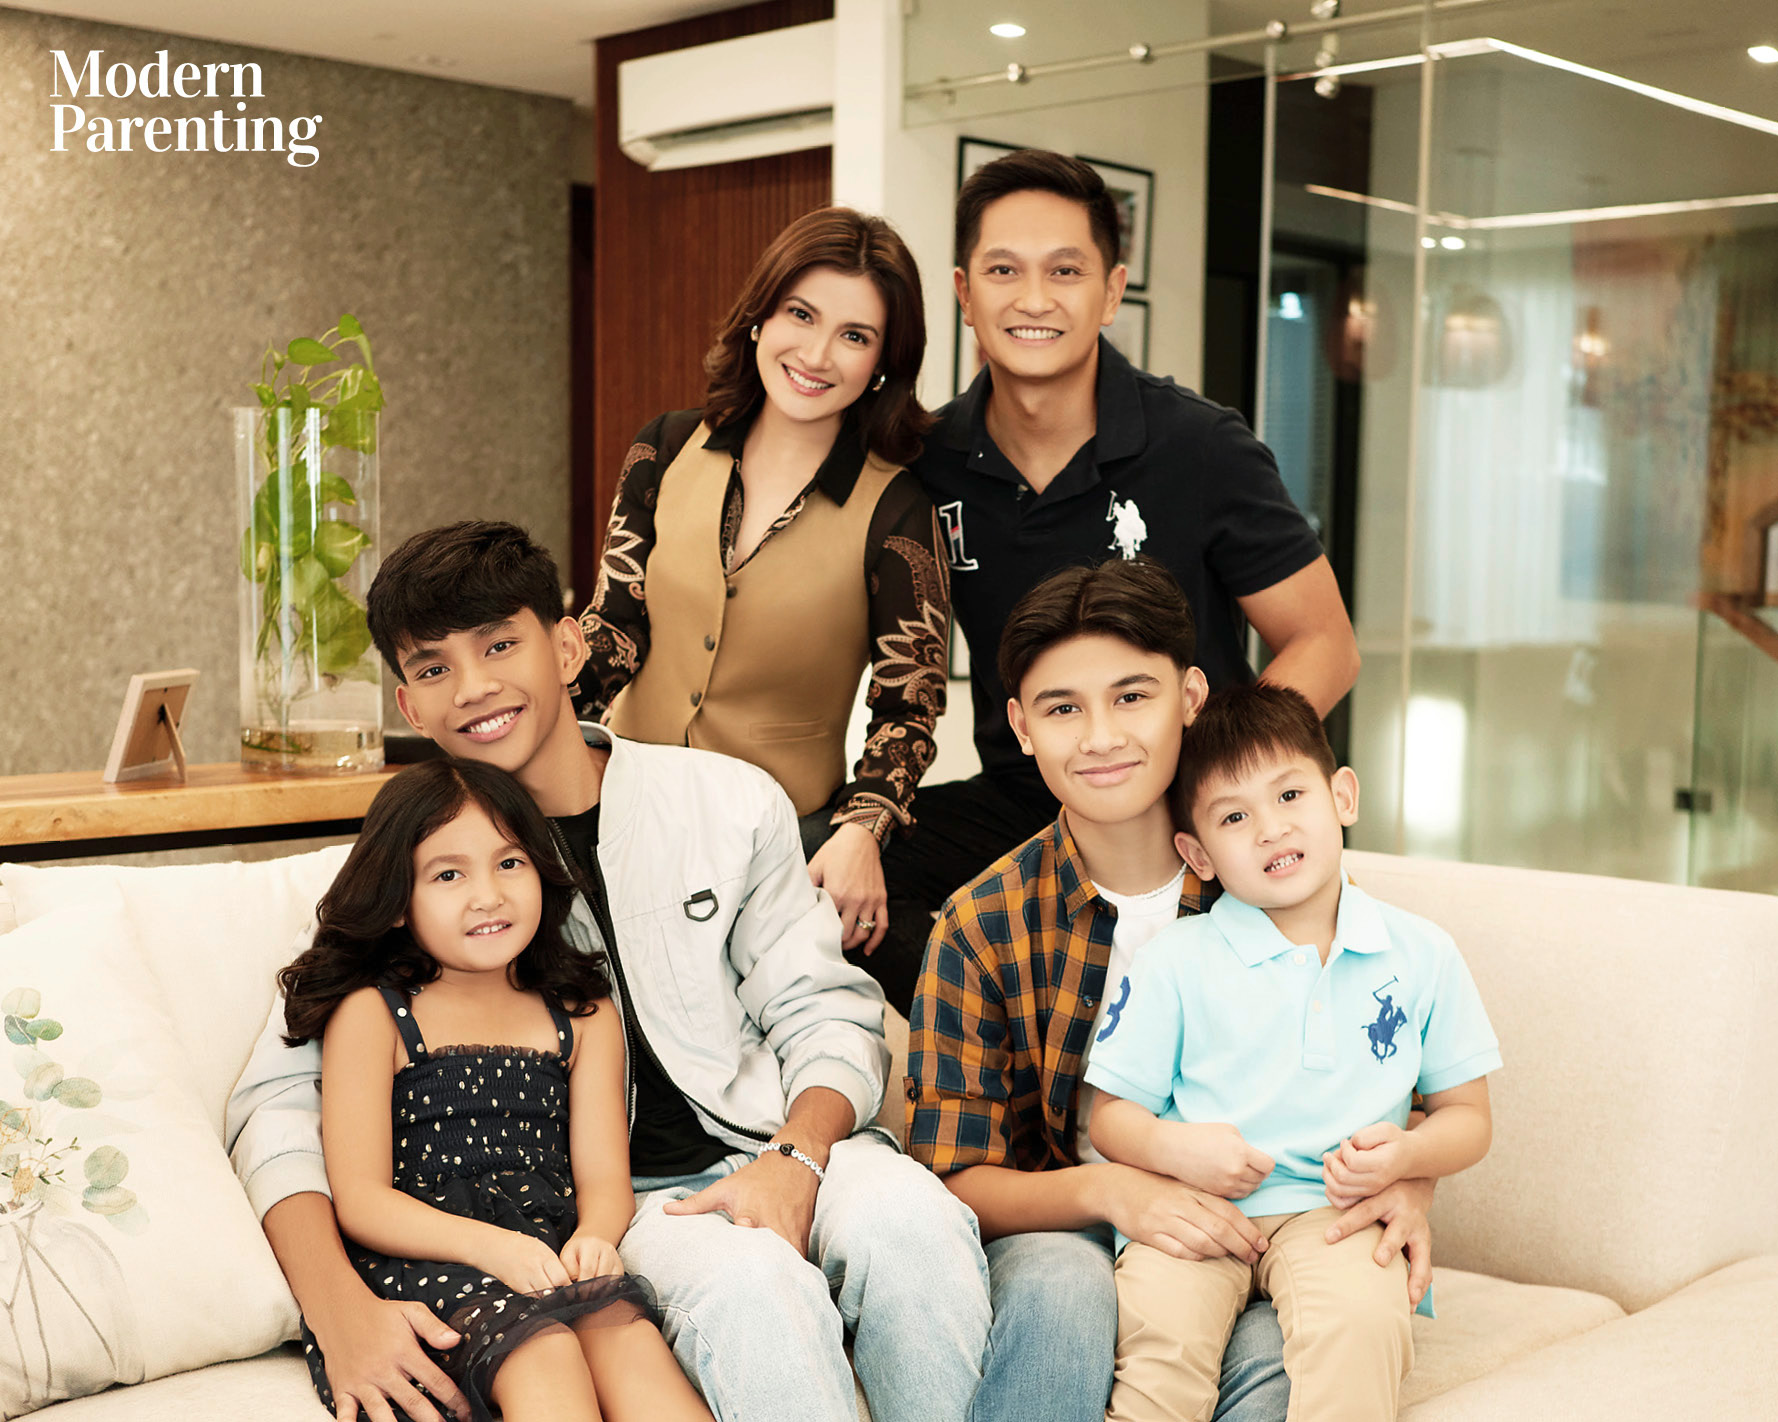 Camille Prats and VJ Yambao with their blended family